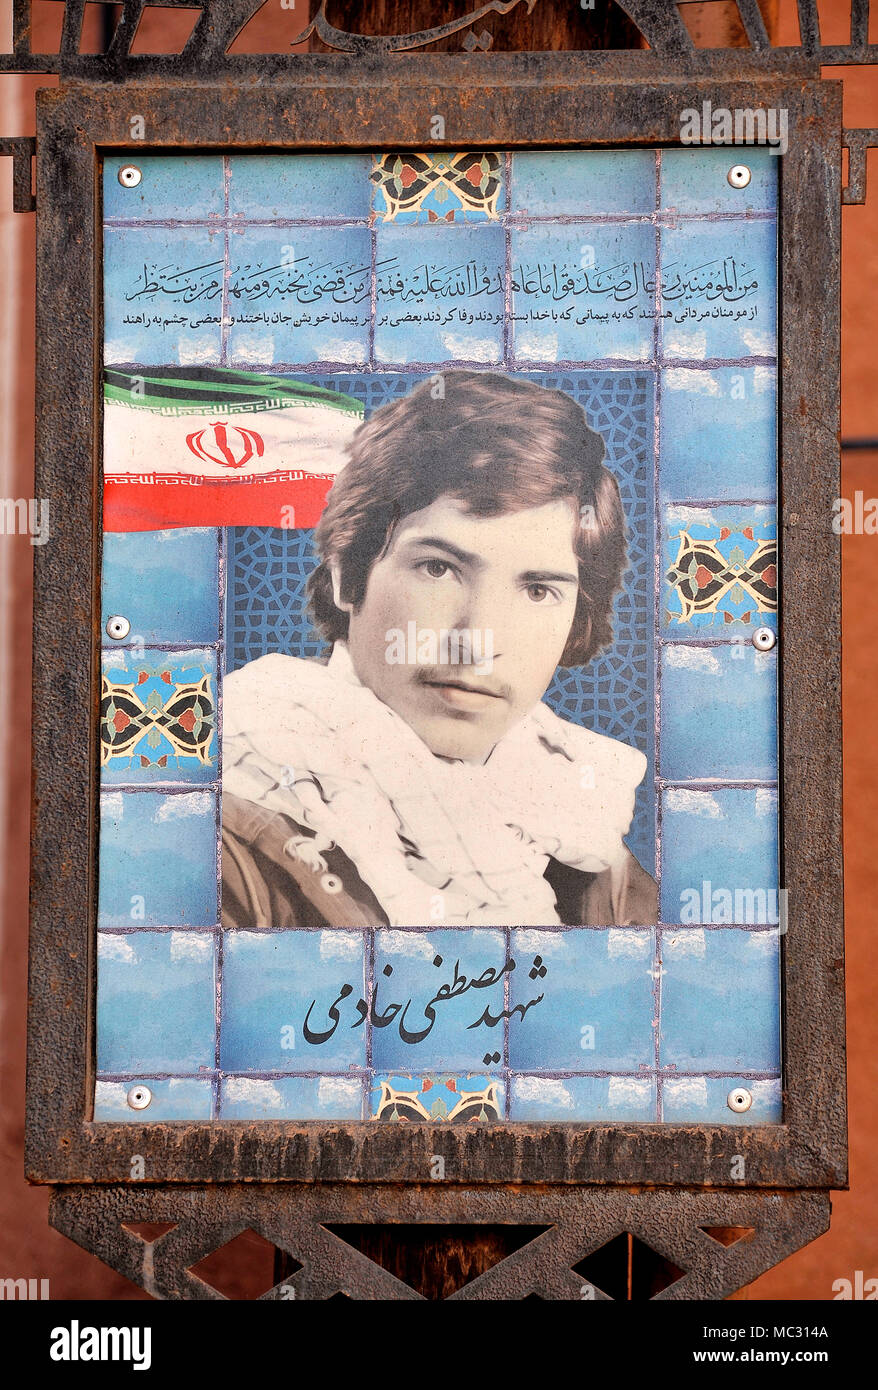 Roadside memorial for a martyr from the Iran Iraq war in Abyaneh, Iran Stock Photo